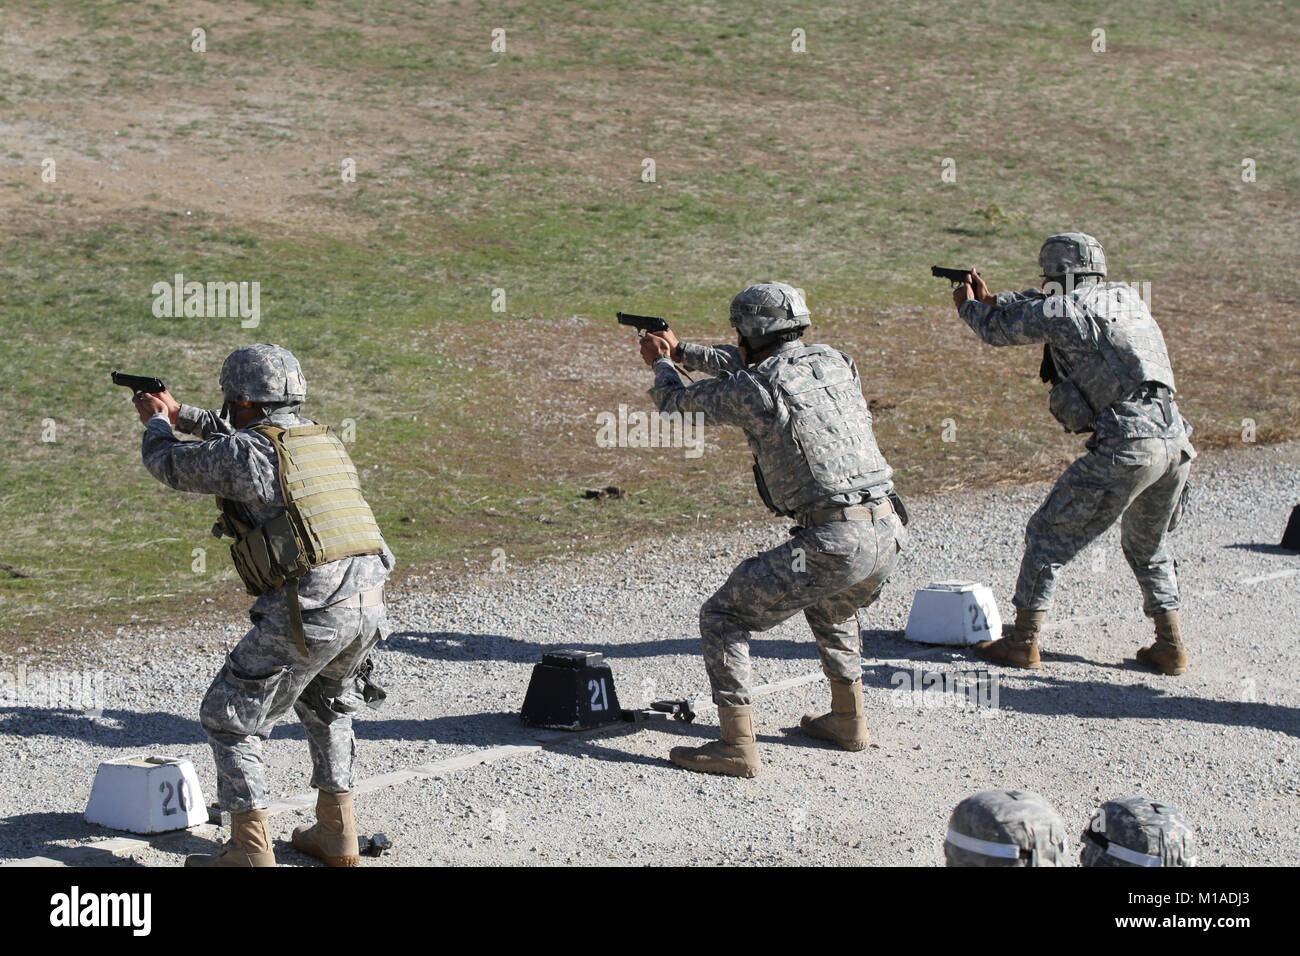 Competitors in the California Army National Guard’s 2015 Best Warrior Competition fire 9-millimeter hand weapons for qualification Nov. 18 at Camp San Luis Obispo, San Luis Obispo, California. (U.S. Army National Guard photo/Staff Sgt. Eddie Siguenza) Stock Photo